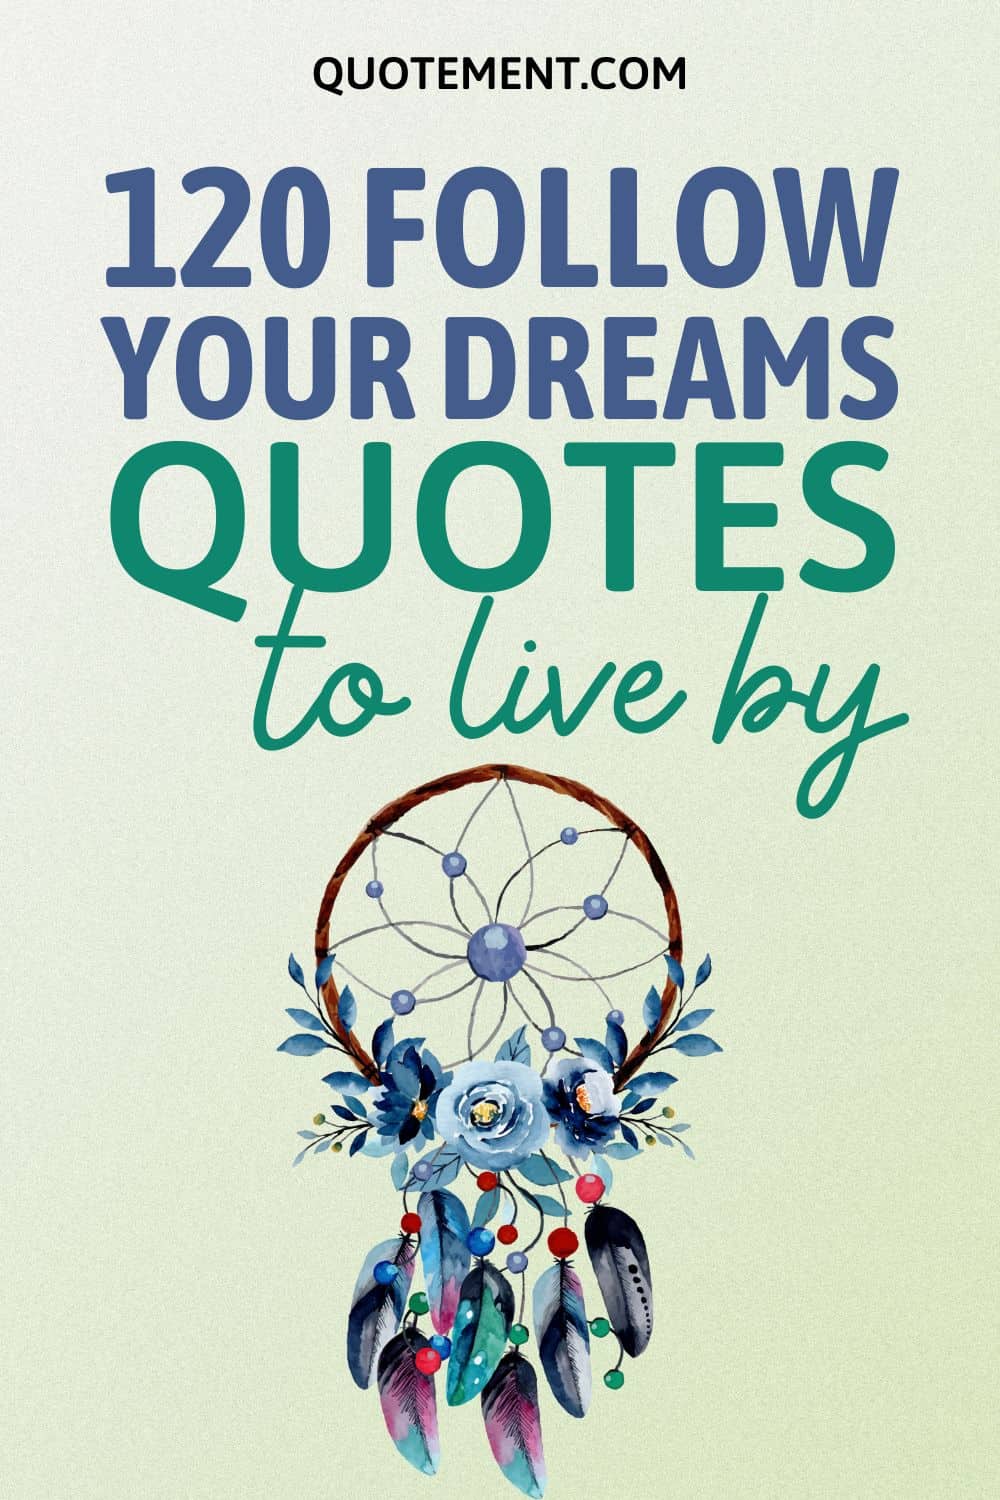 120 Follow Your Dreams Quotes To Keep You On The Track
